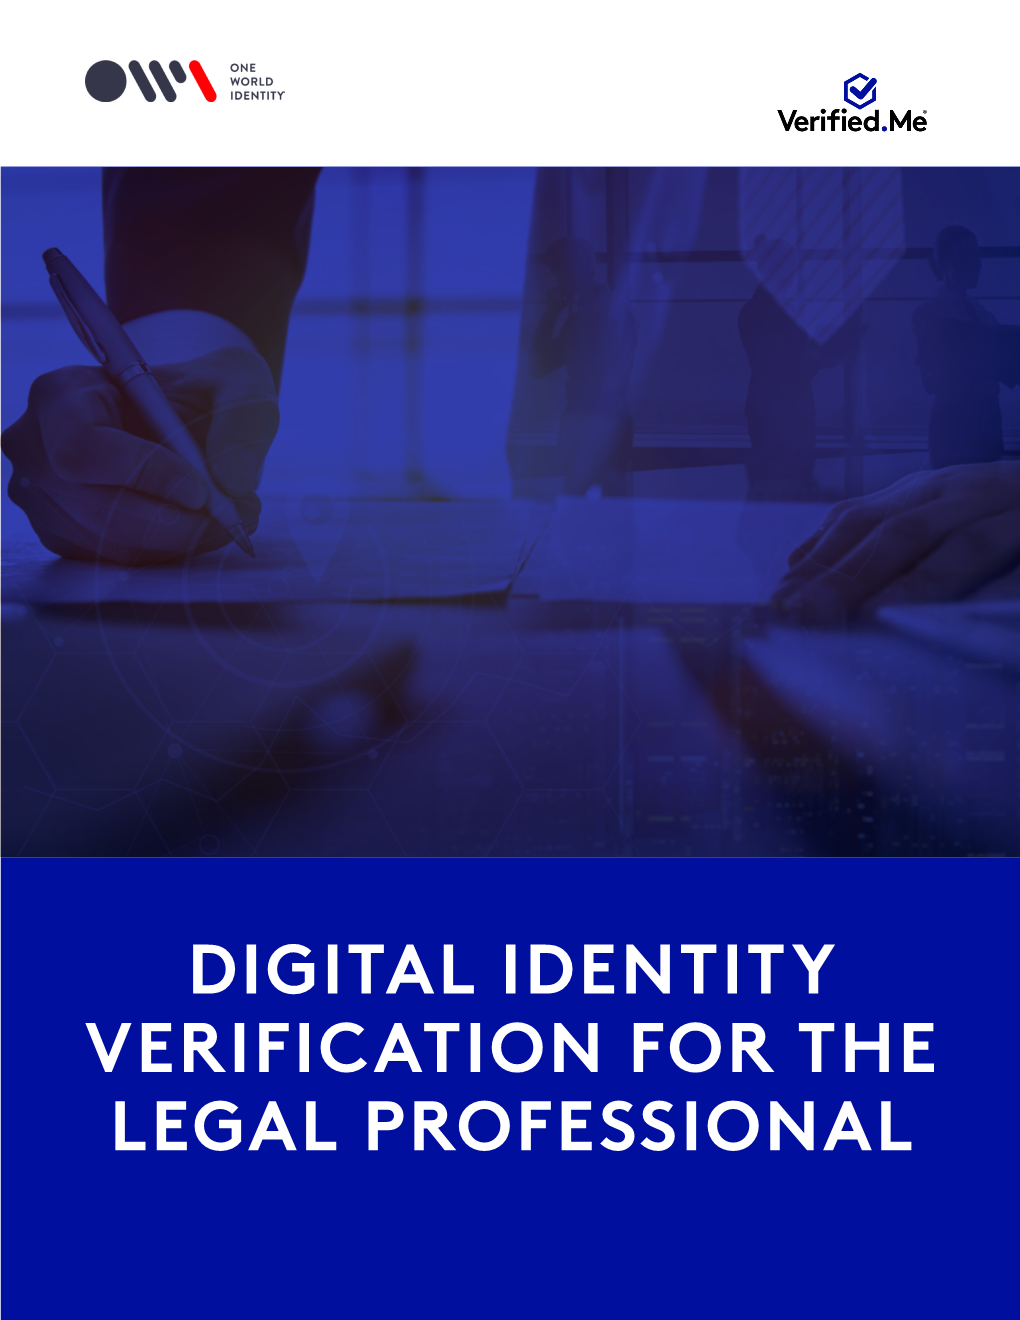 Digital Identity Verification for the Legal Professional